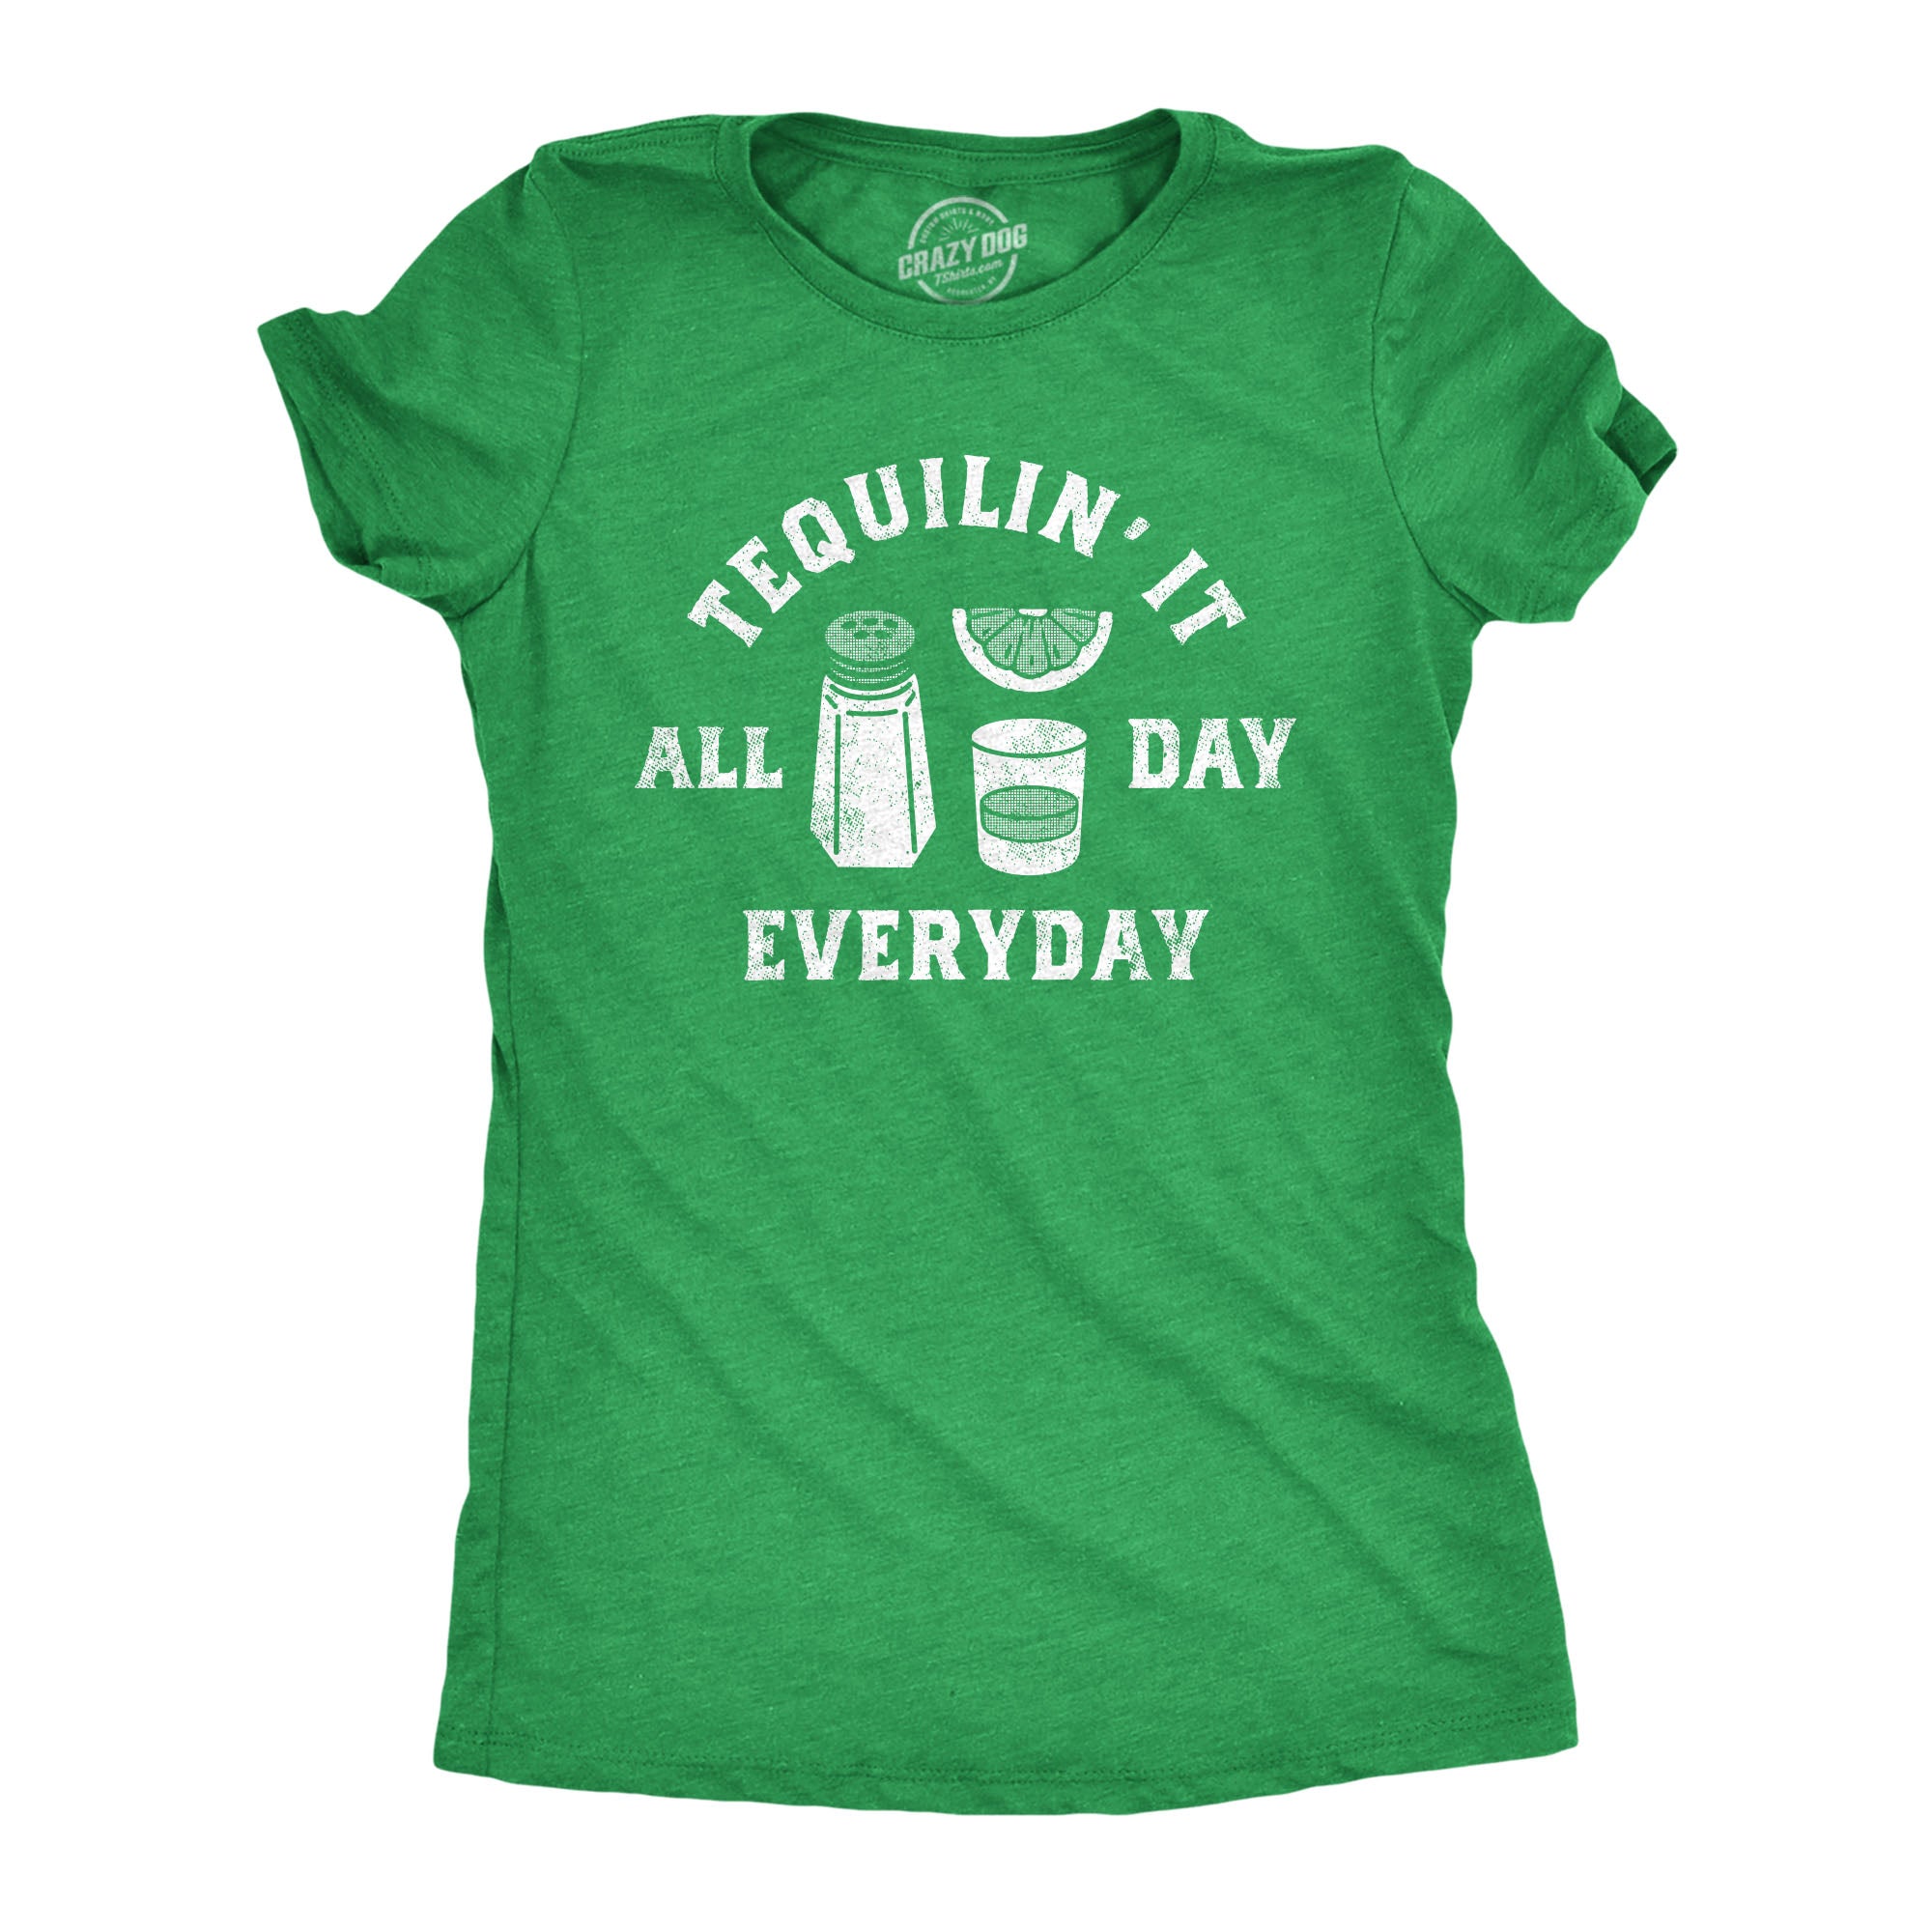 Funny Heather Green - TEQUILIN Tequilin It All Day Everyday Womens T Shirt Nerdy Drinking Liquor Tee